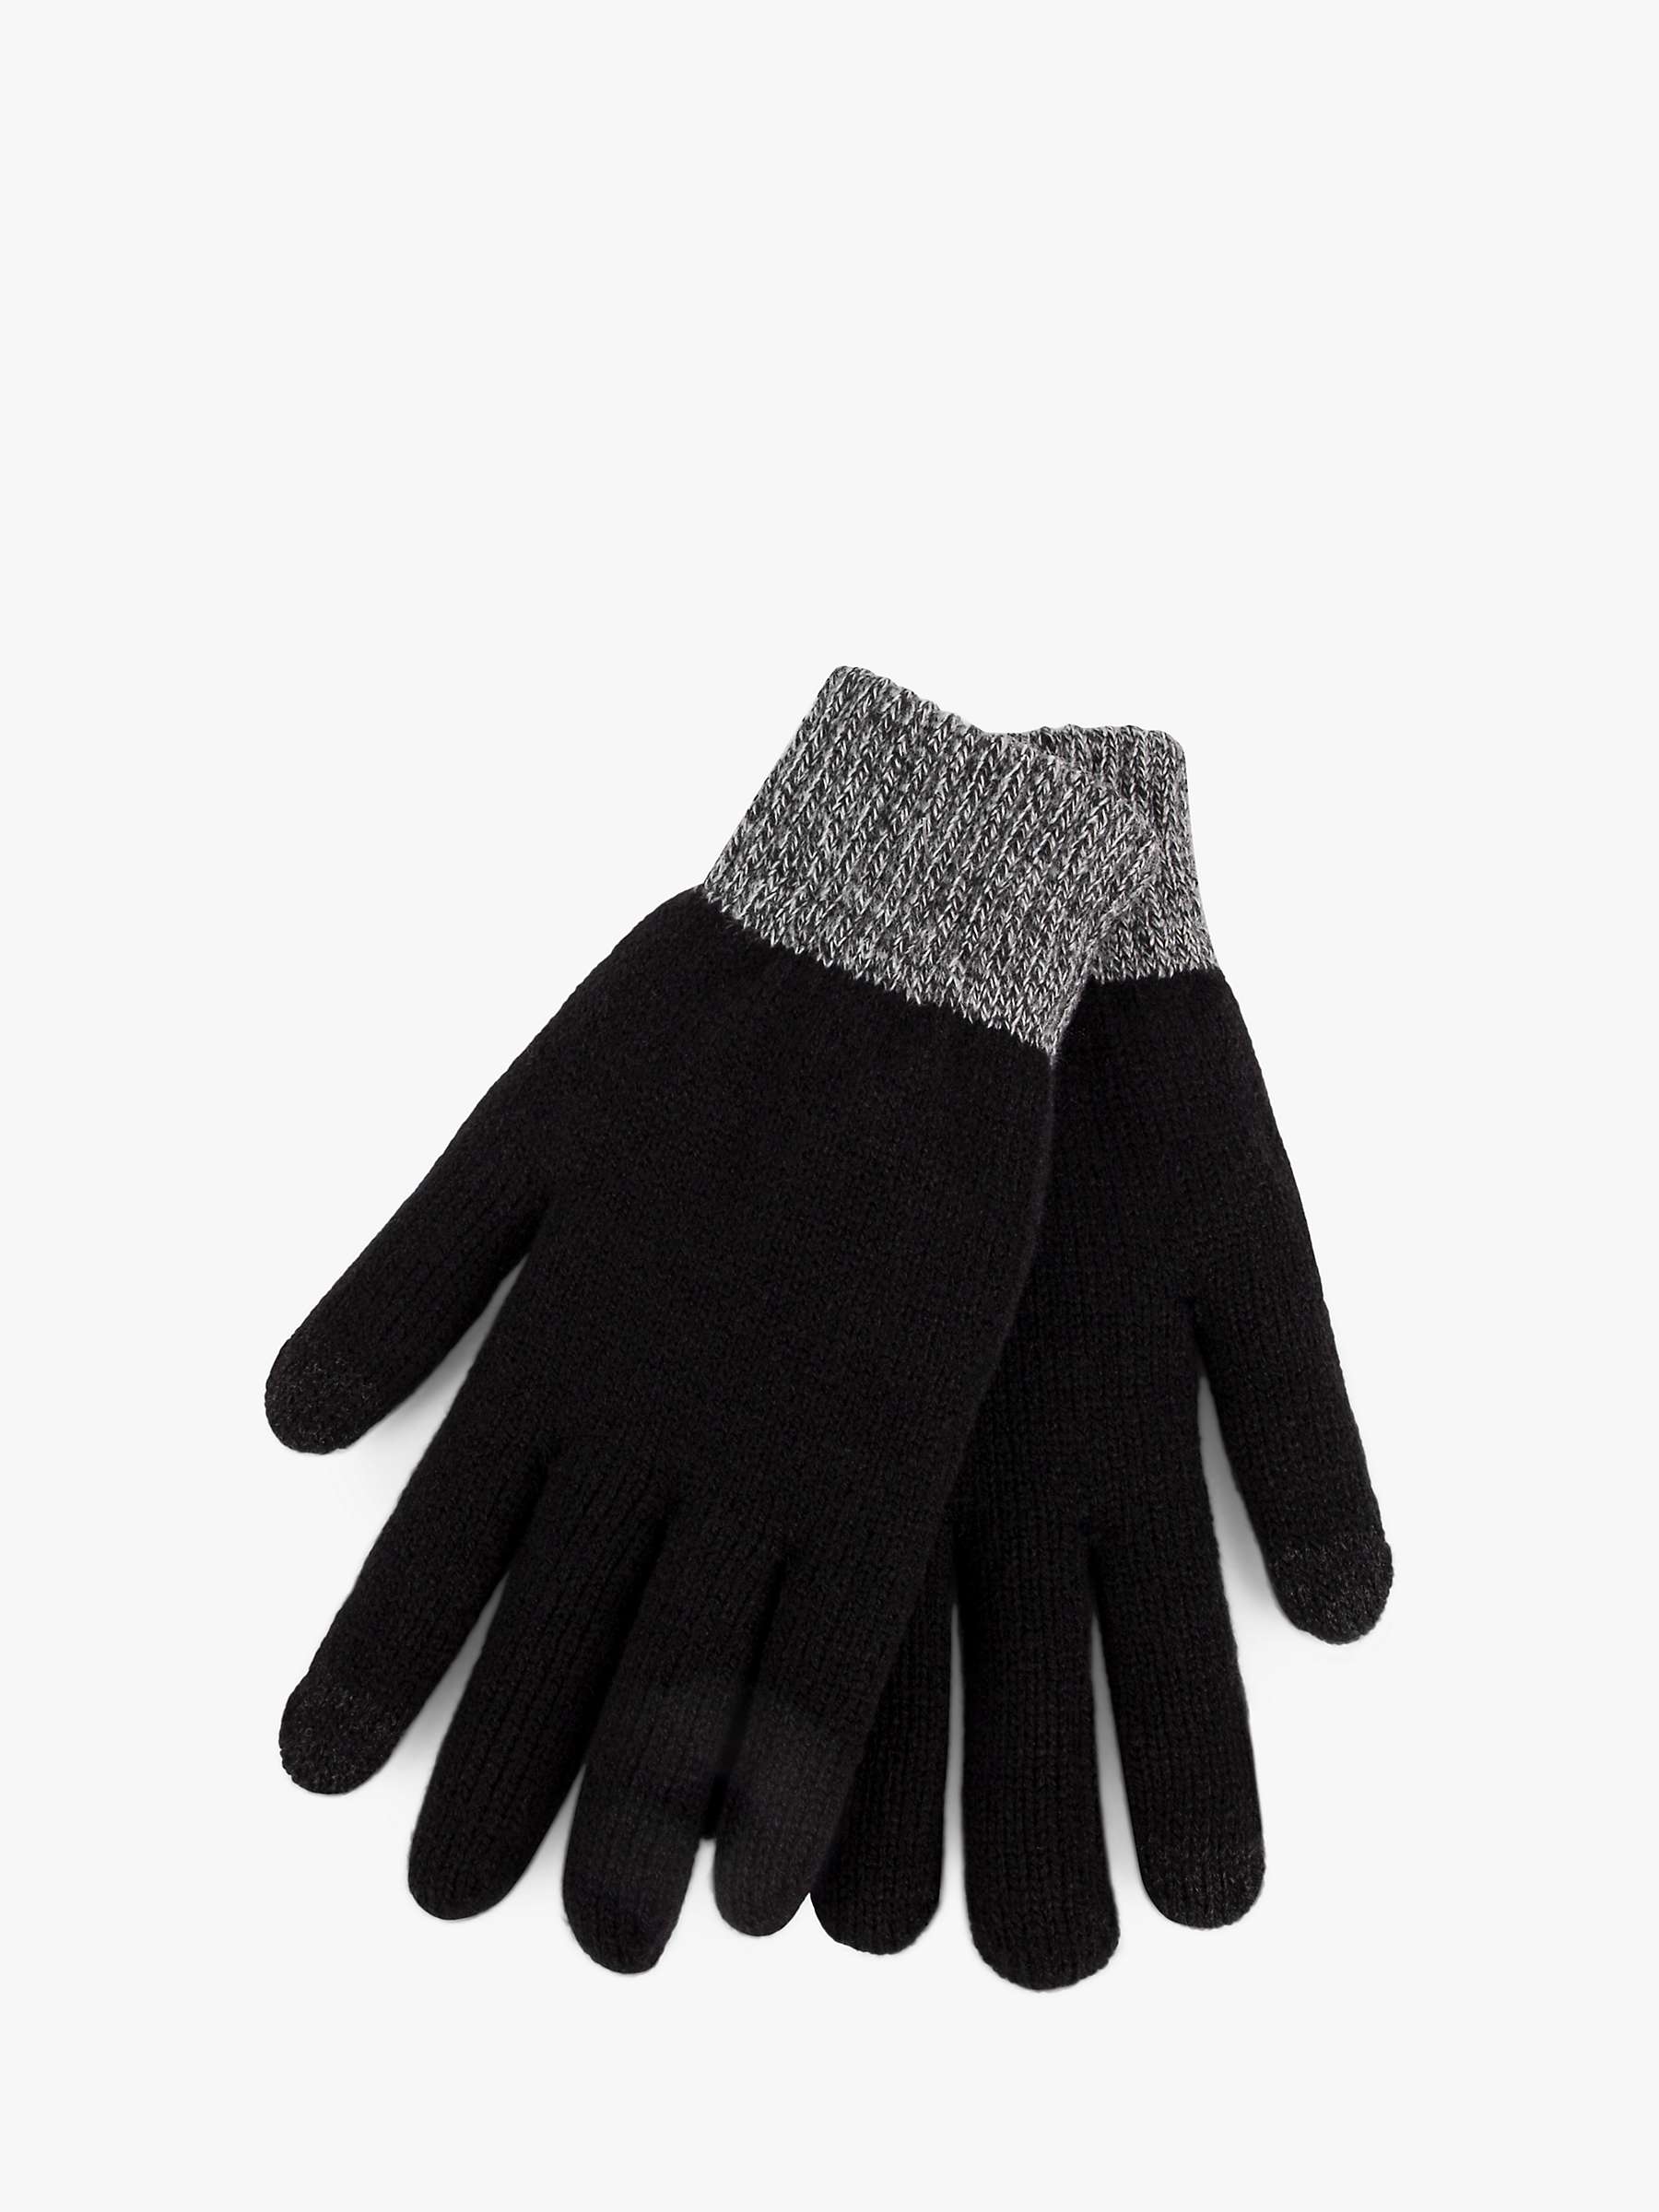 Buy totes Thermal Stretch Knitted Smartouch Gloves, Black Online at johnlewis.com